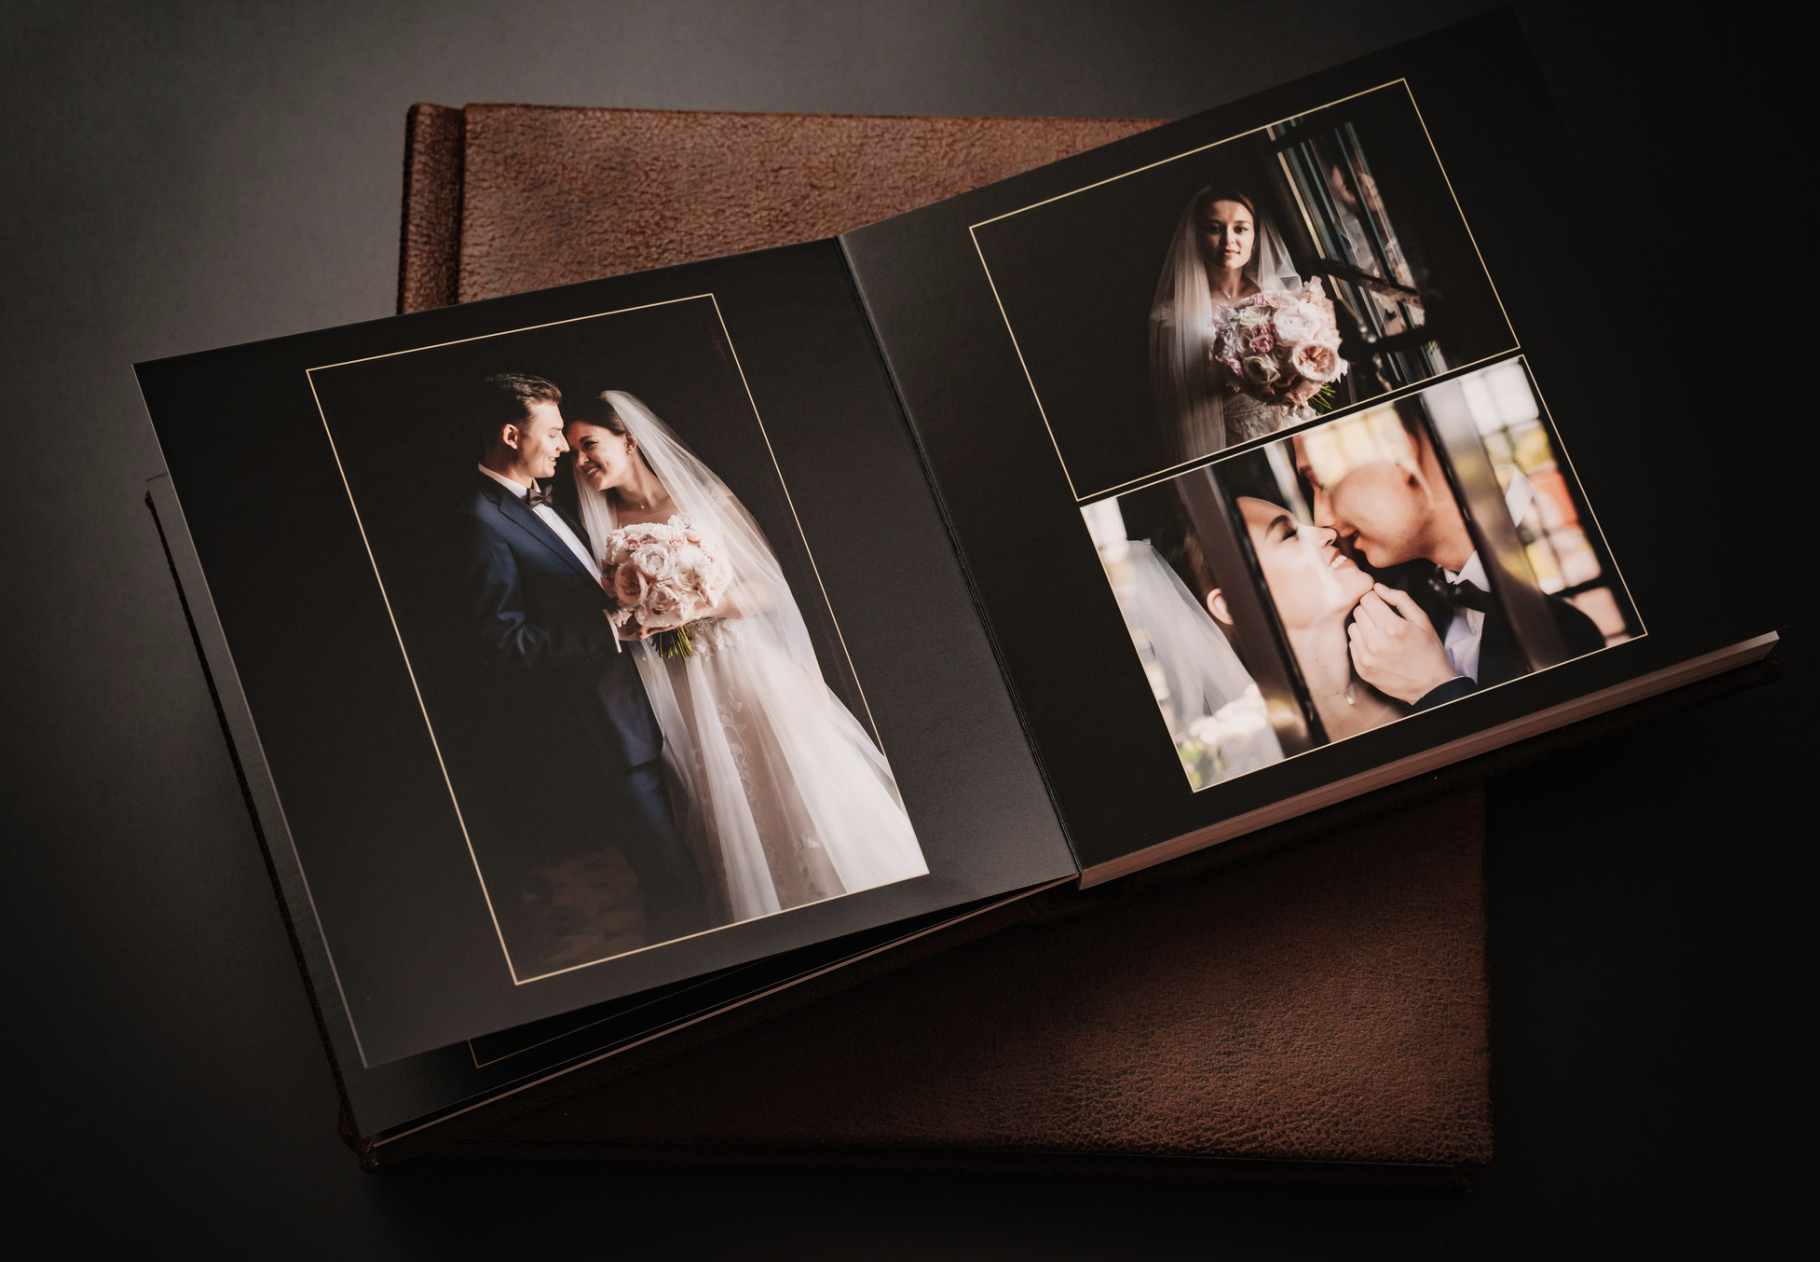 photos of a married couple in a photo album